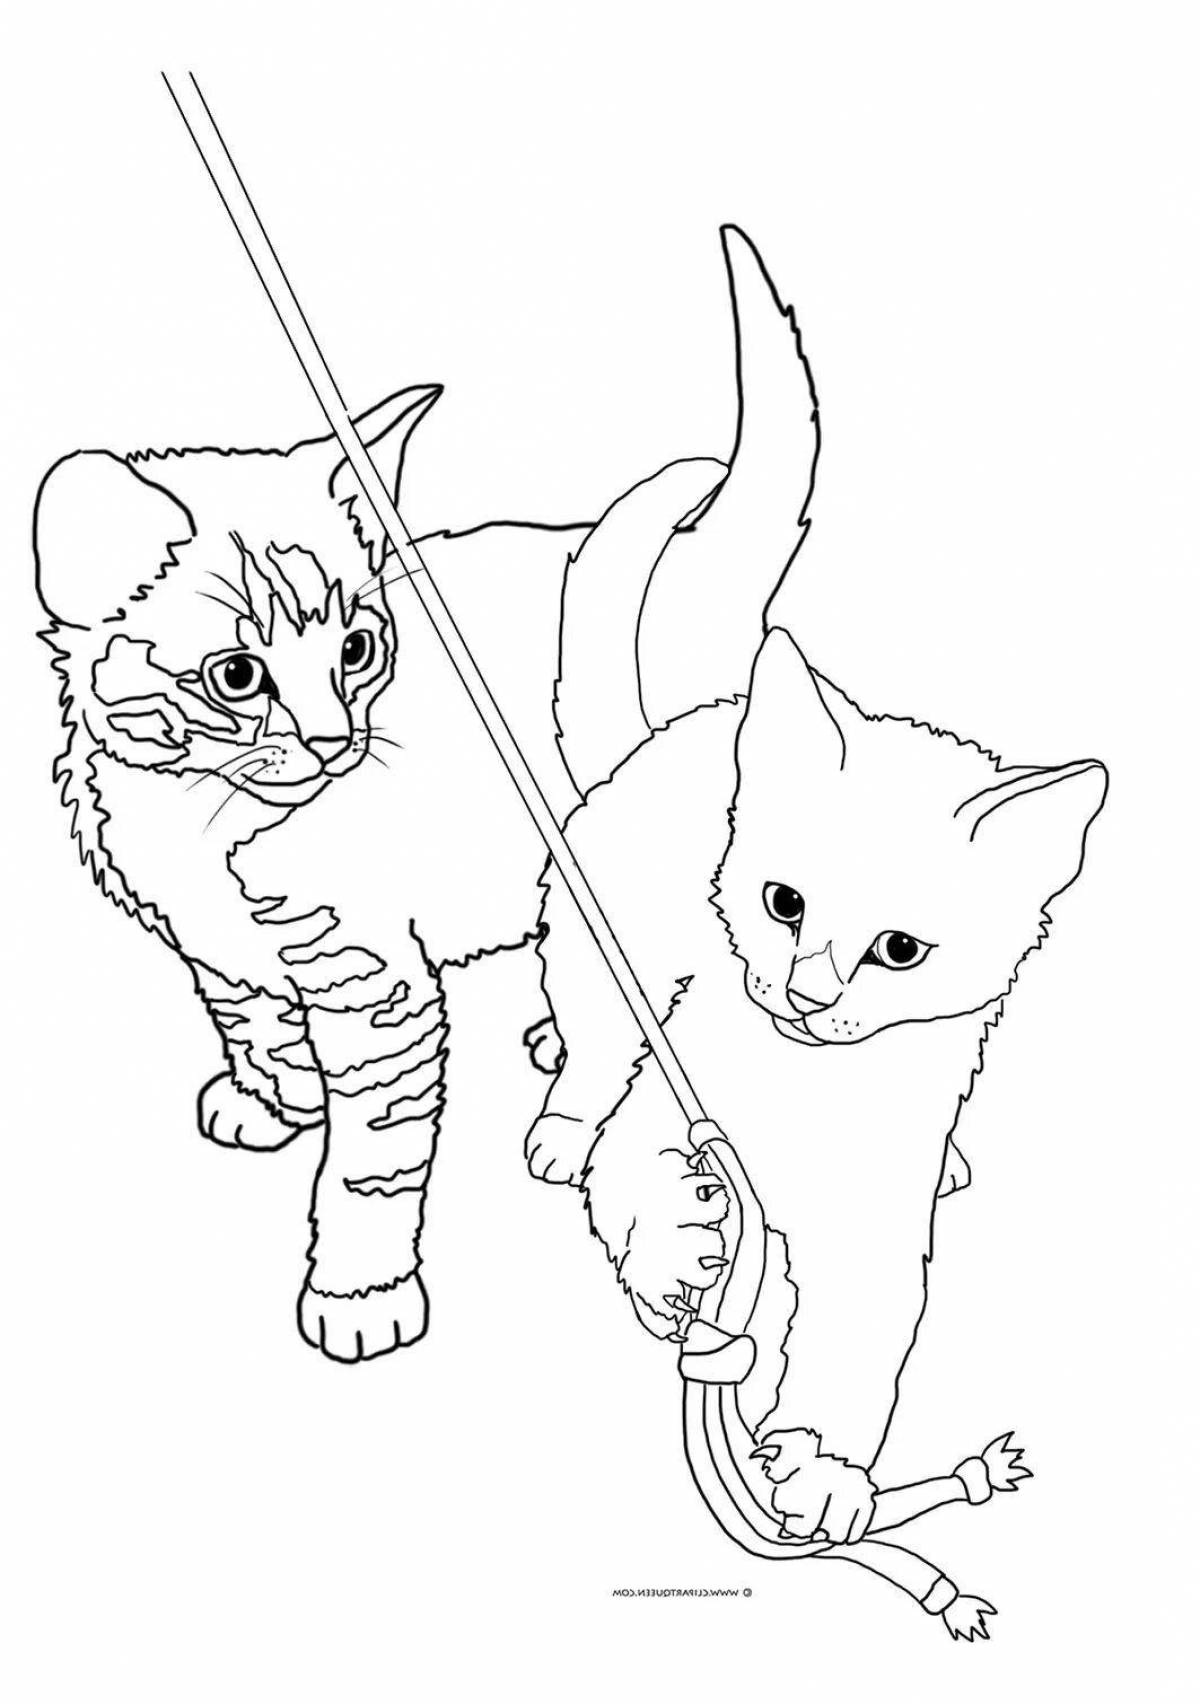 Real cat coloring page